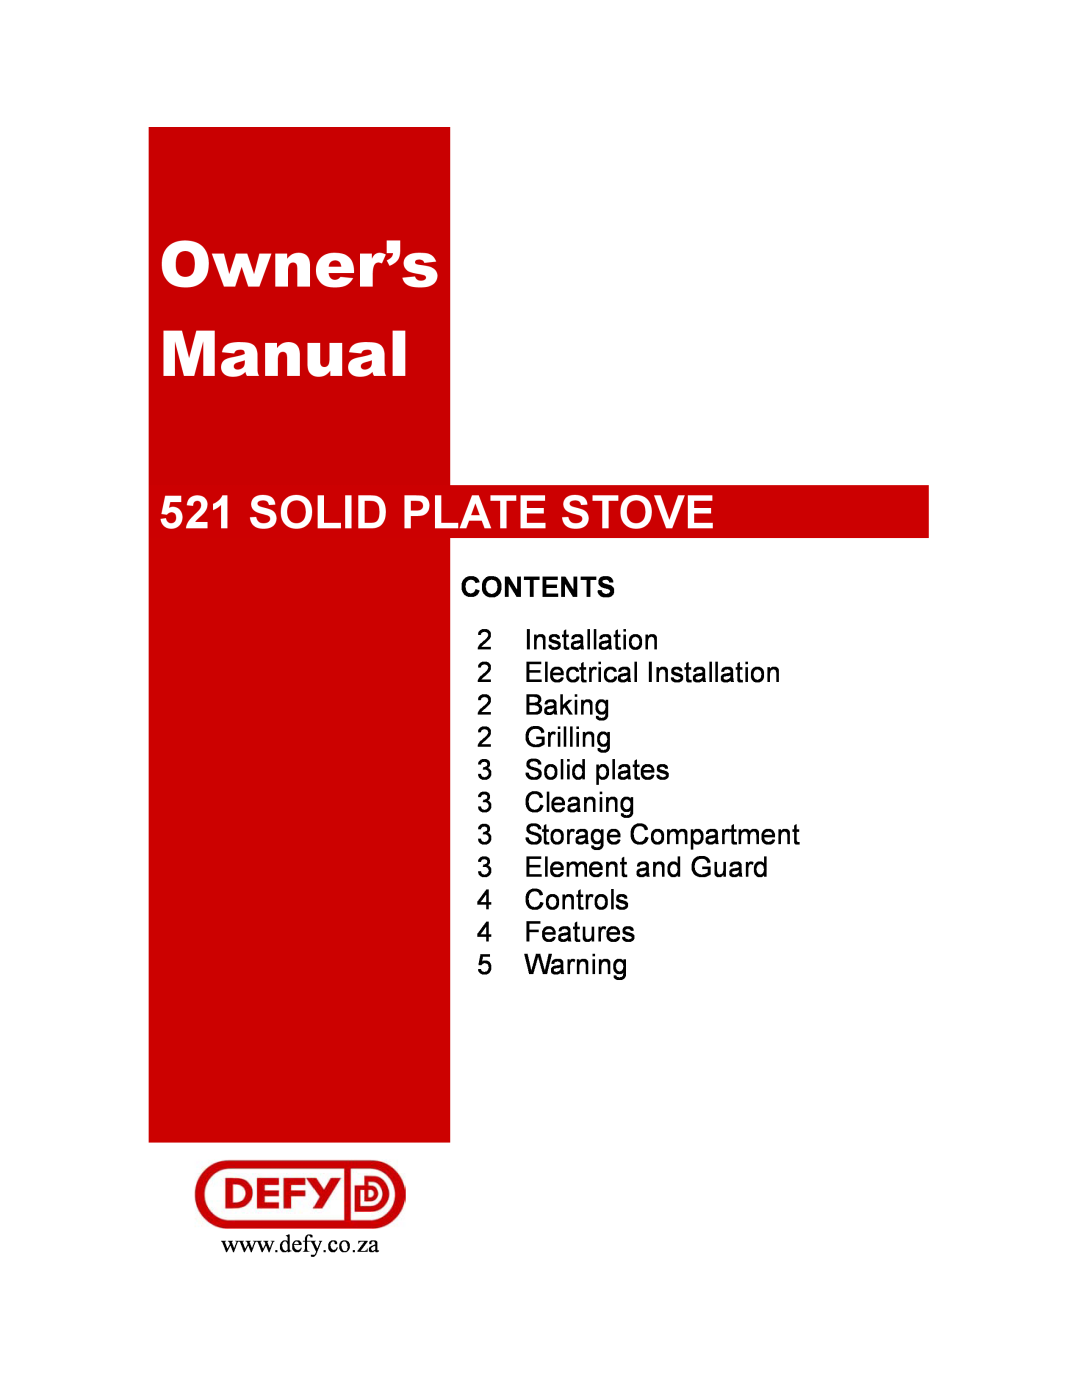 Defy Appliances 521 owner manual Owner’s Manual, Solid Plate Stove, Contents 